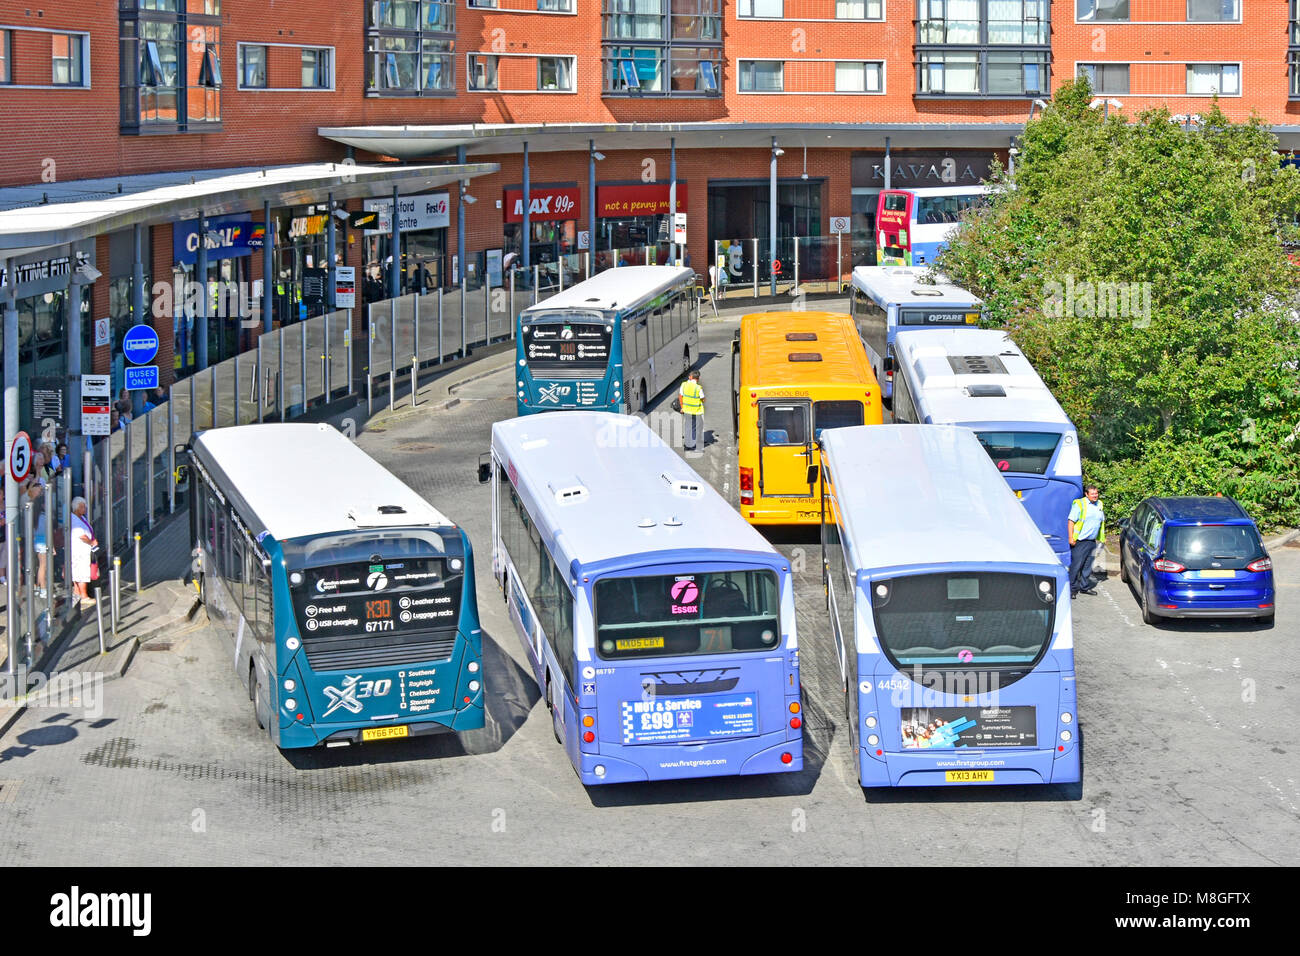 View from above looking down at buses Chelmsford town centre public transport bus station small selection retail shops behind passenger waiting area Stock Photo